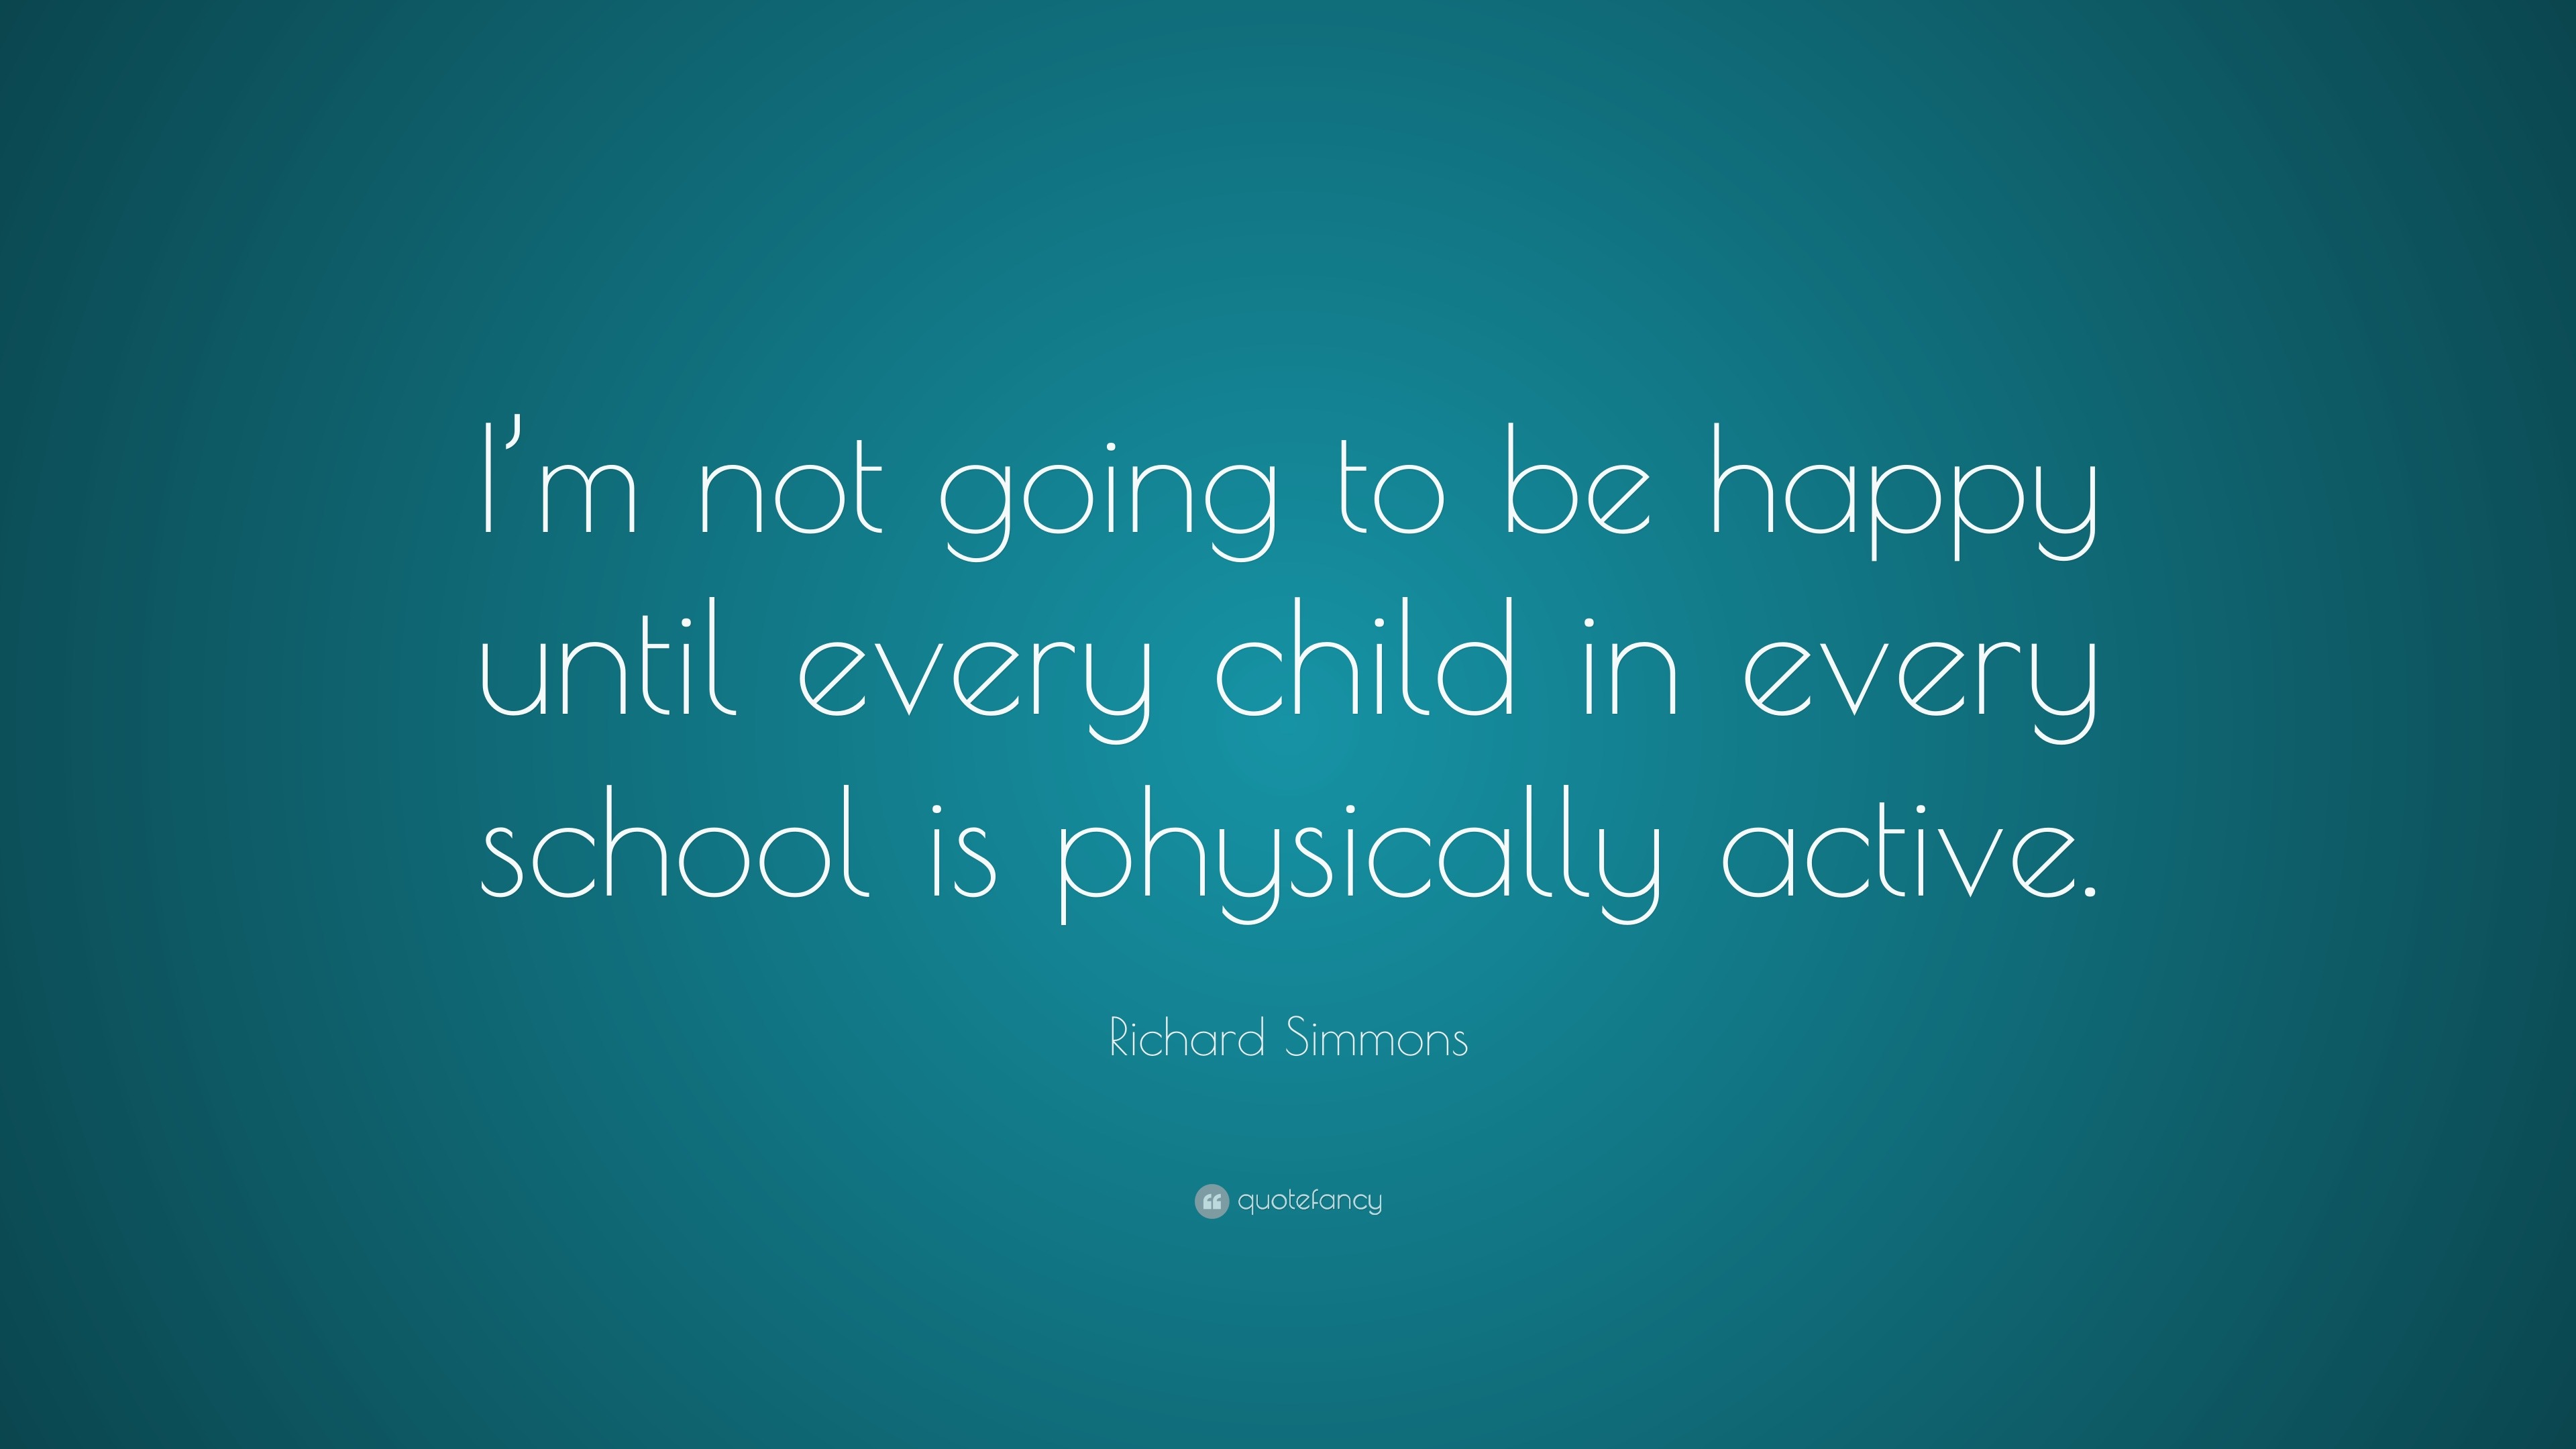 Richard Simmons Quote: "I'm not going to be happy until ...